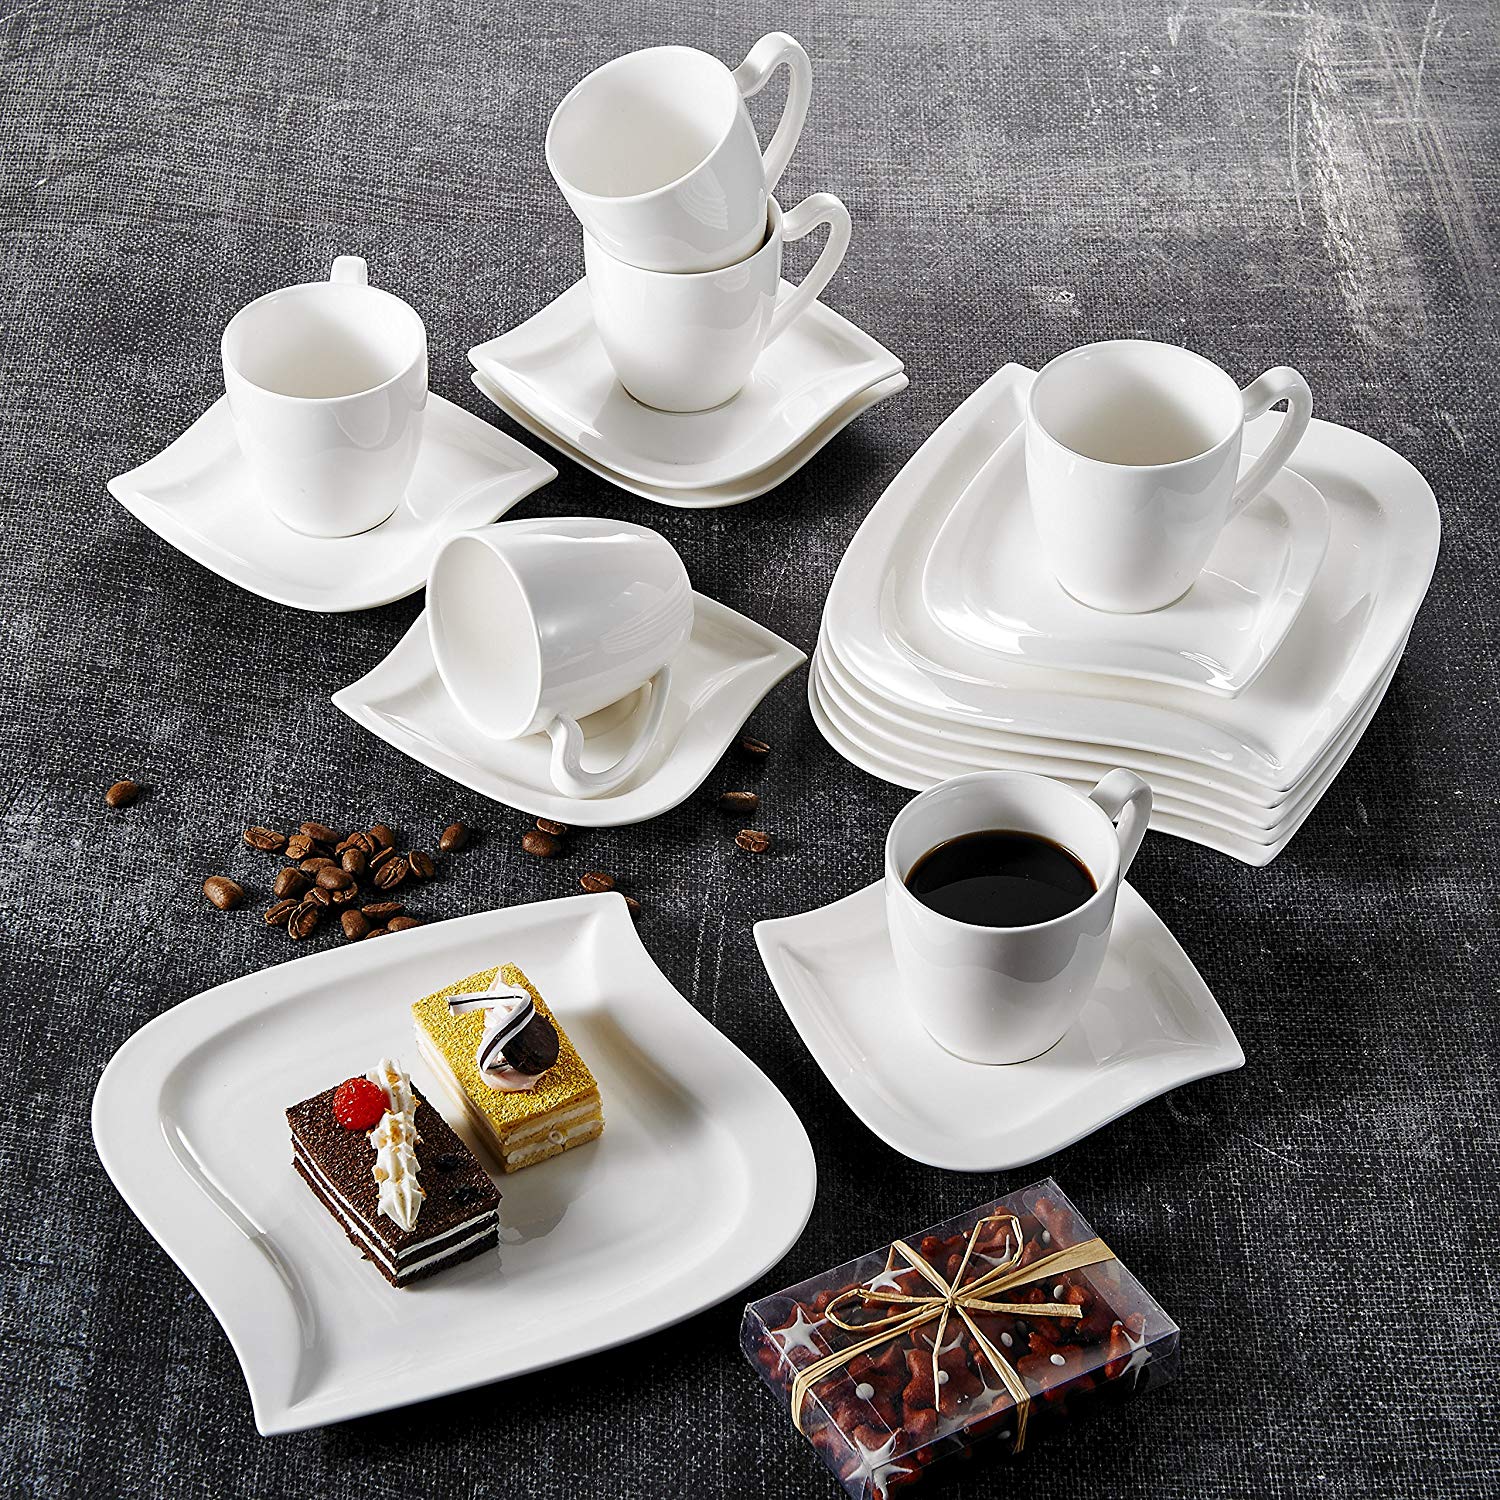 Elvira 18-Piece White Porcelain Ceramic Dinner Combi-Set with 6-Piece Coffee Cups,Saucers and Dessert Plates - Nordic Side - 18, and, Ceramic, Coffee, CombiSet, CupsSaucers, Dessert, Dinner, 